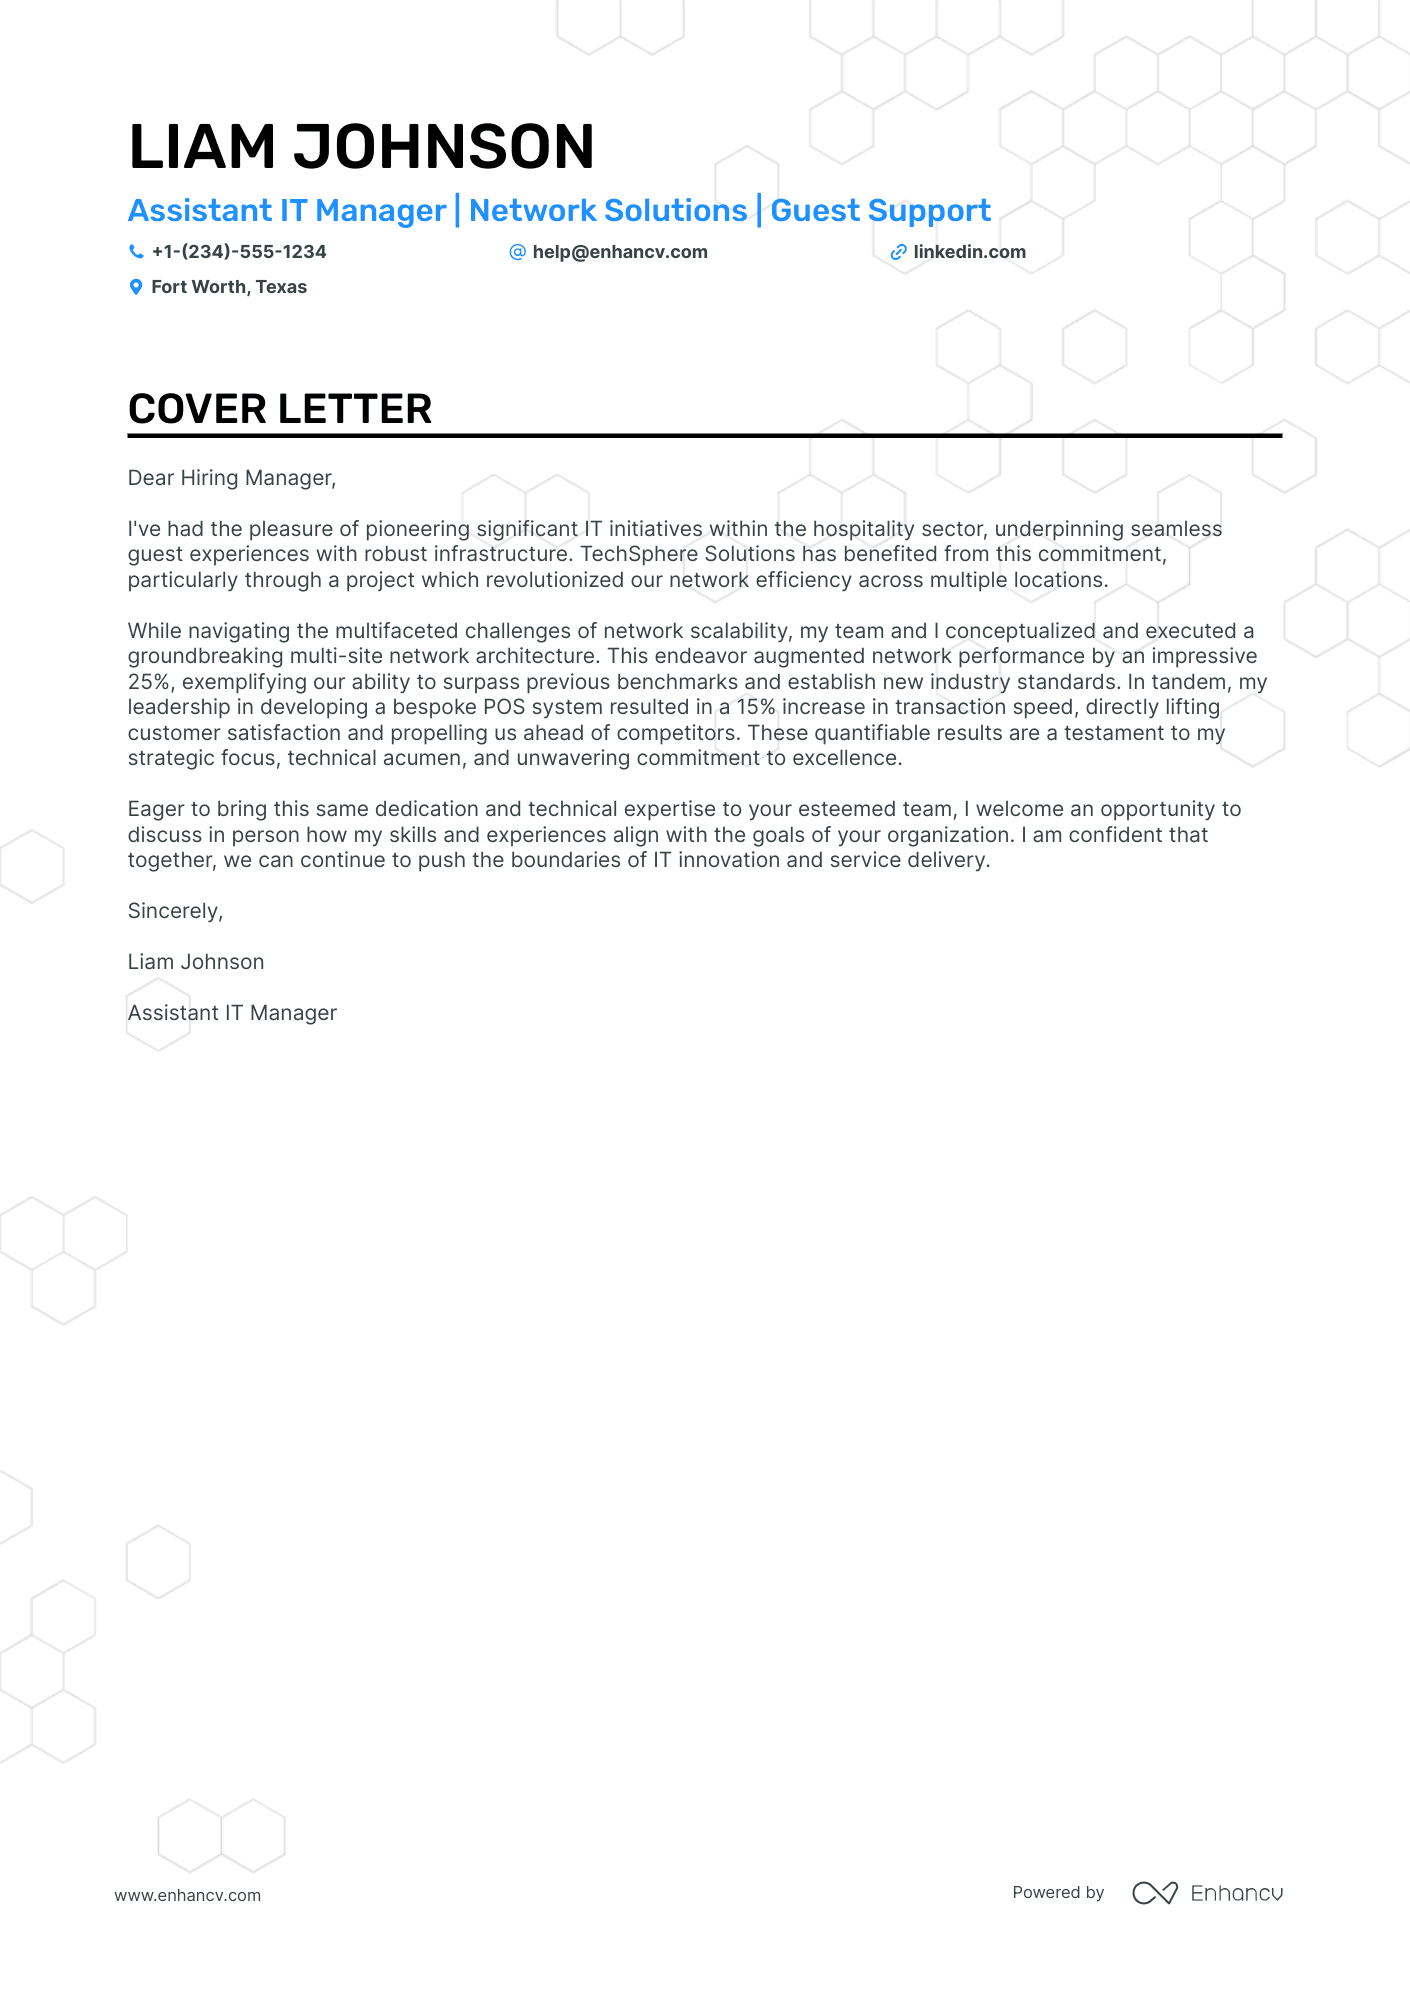 application letter for it manager